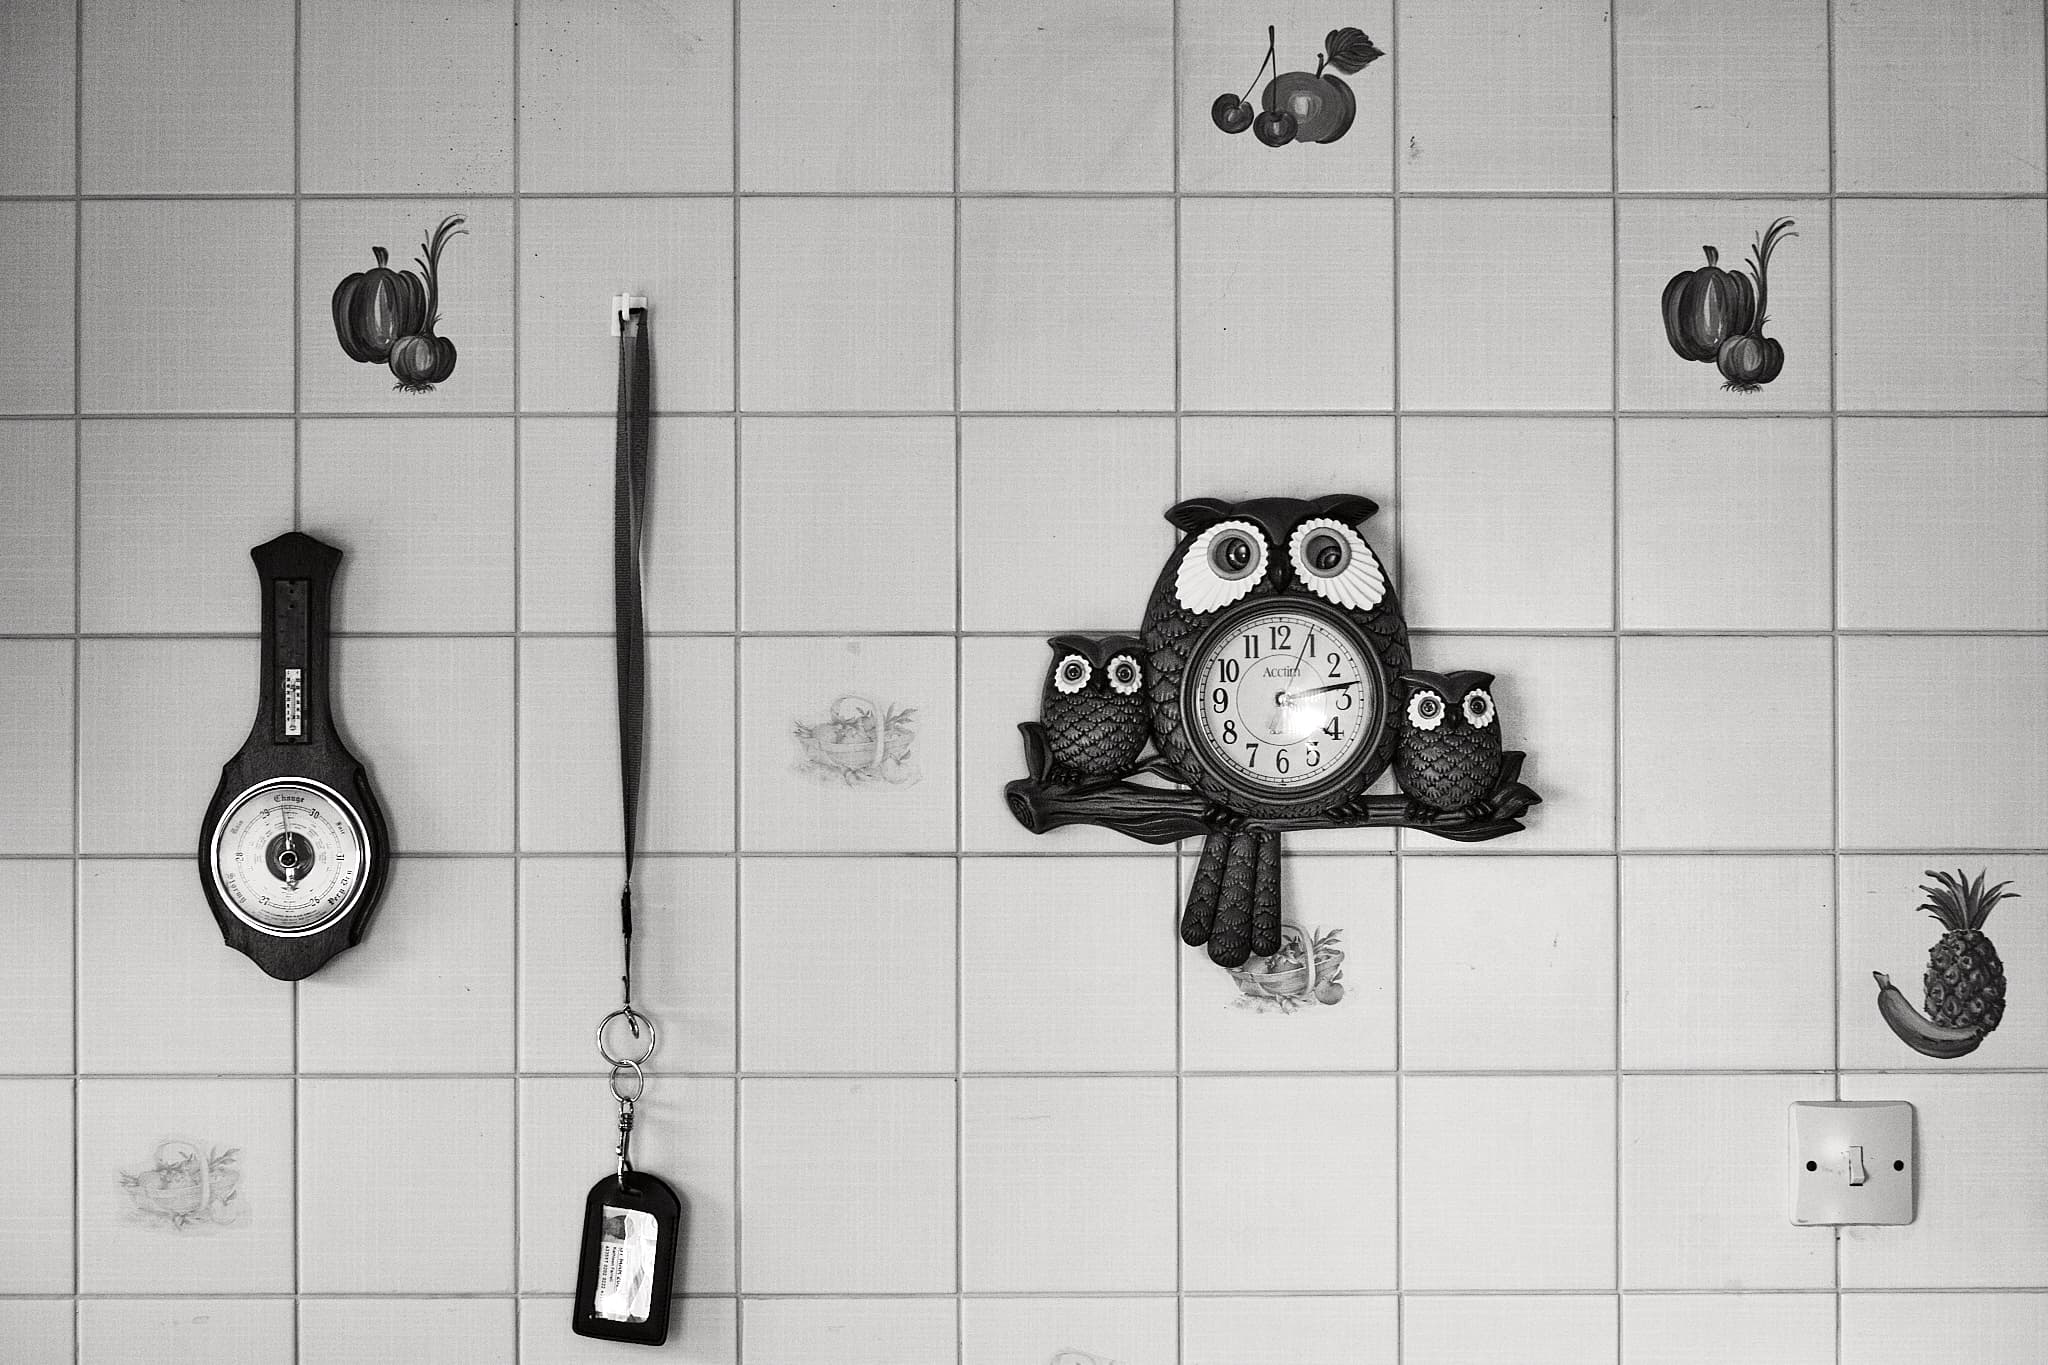 owl clock and other things on the wall of my parents’ kitchen